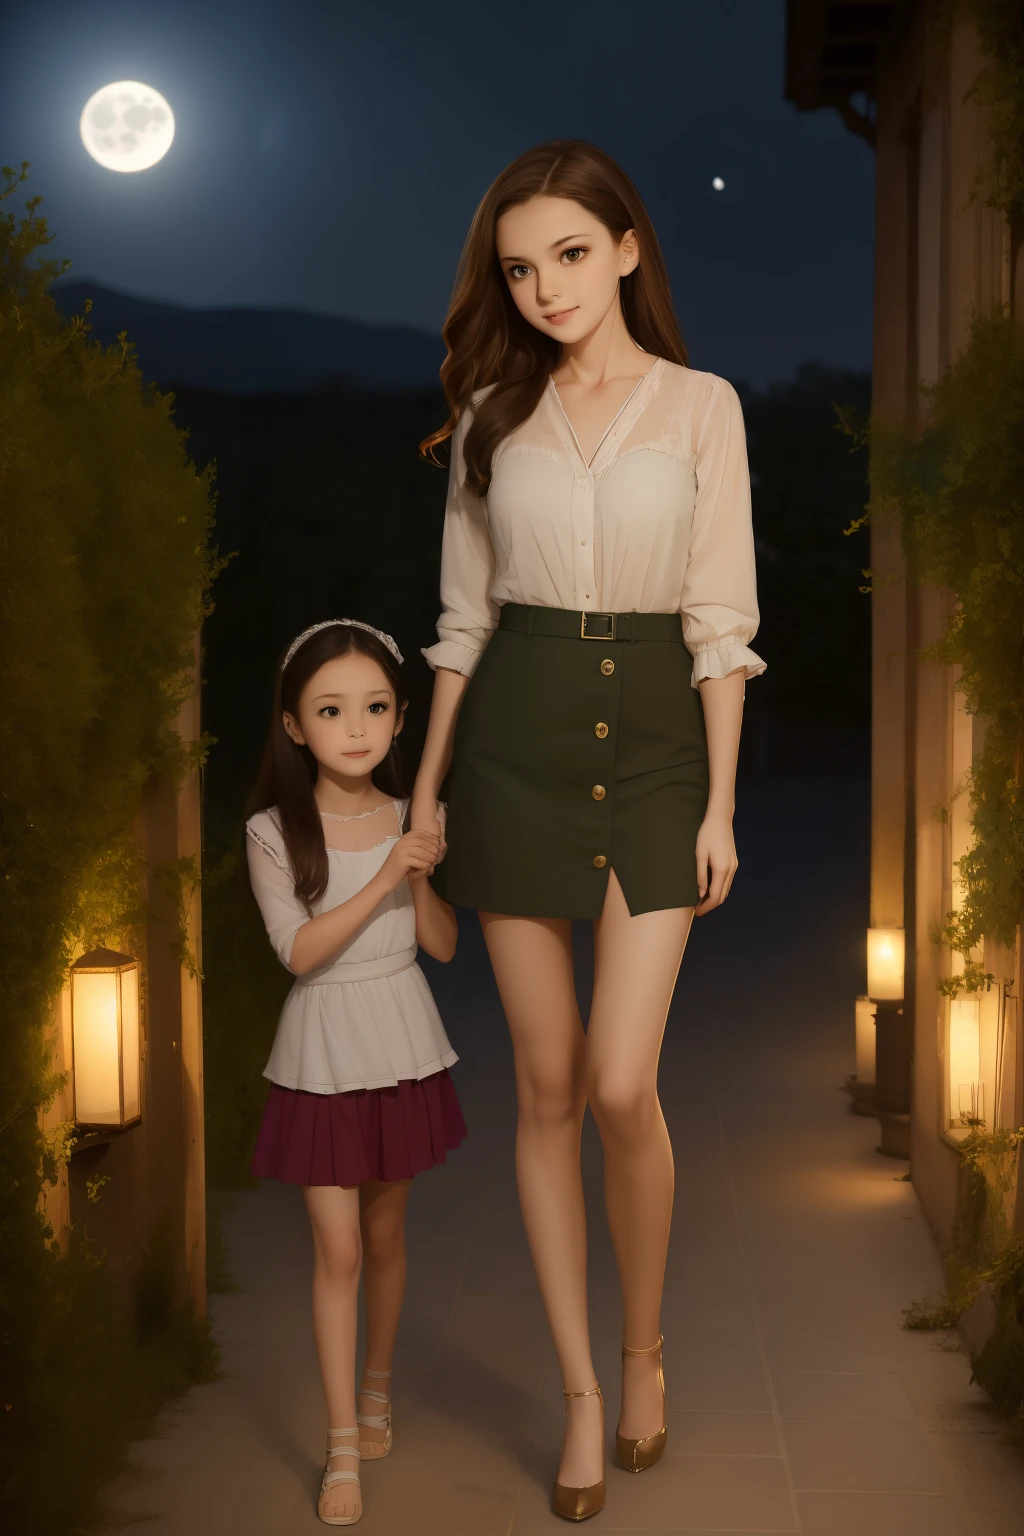 full figure sexy full figure  skinny mom 33 years old  woman whit 13 years old daughter at a  inside a palladian villa, wearing very short miniskirt, micro top, light brown hair and dark green eyes
. cinematic, moonlight, night,